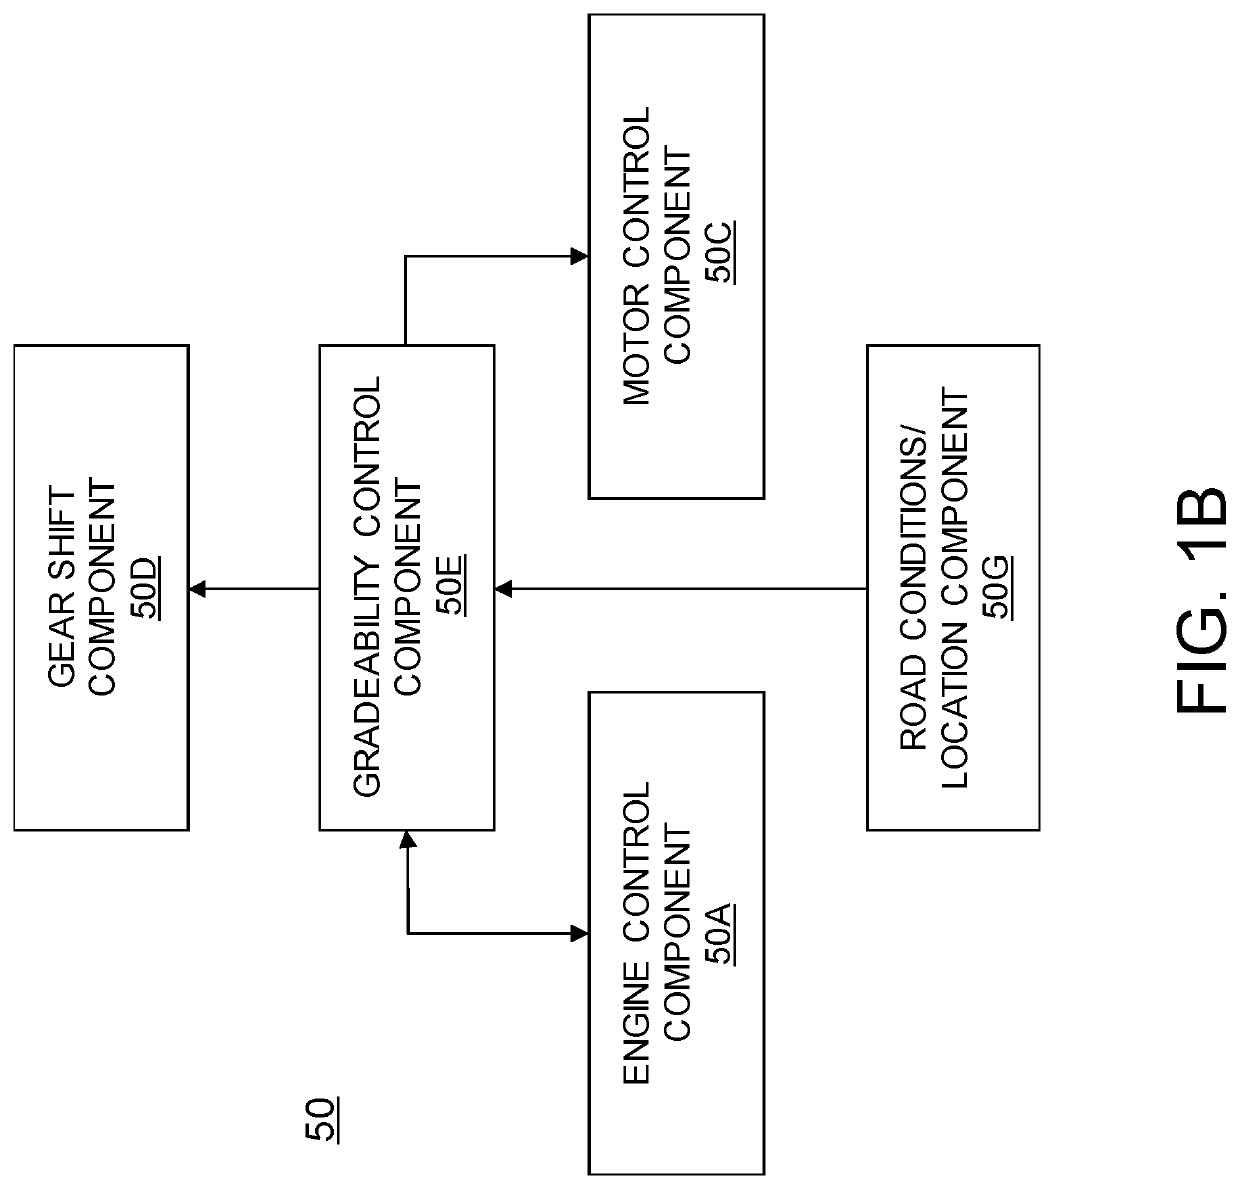 Gradeability control in a hybrid vehicle